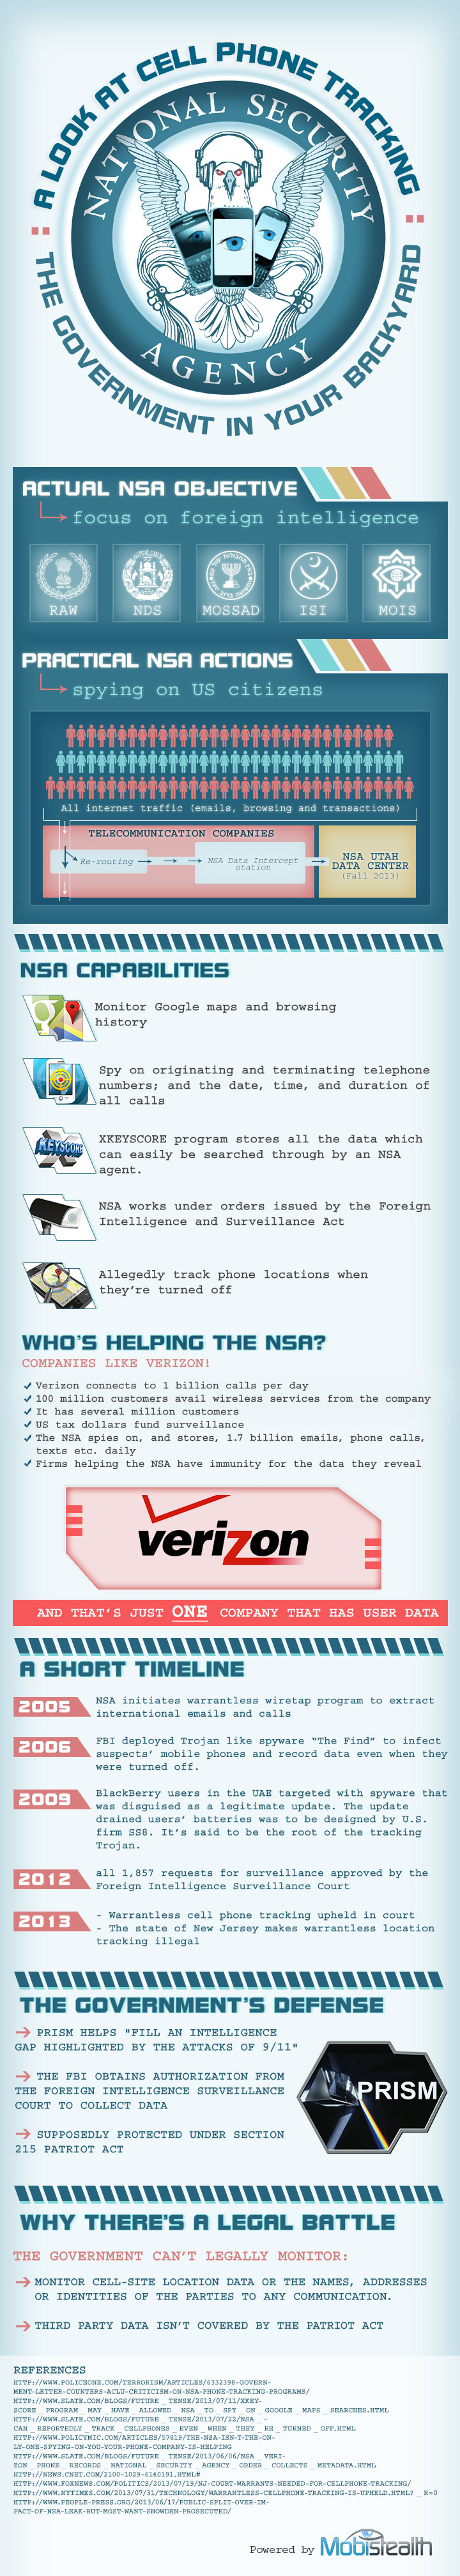 NSA: From security providers to cell phone trackers